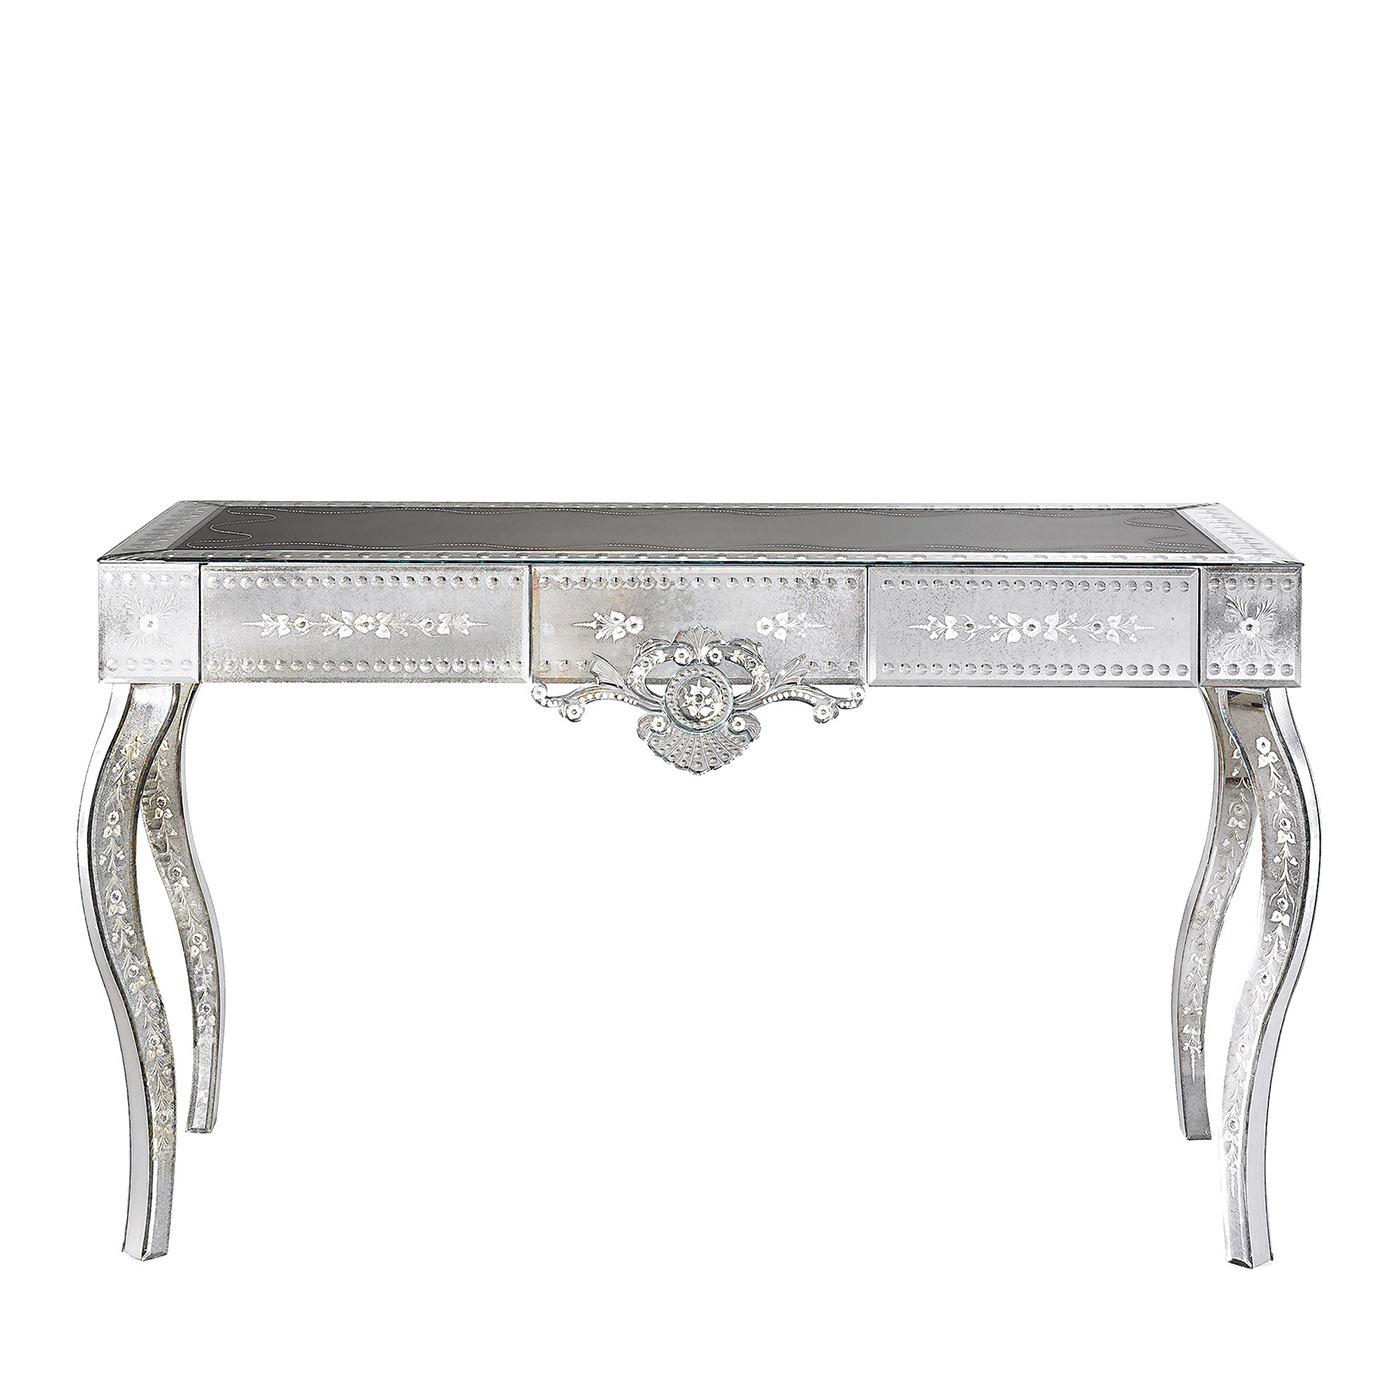 The Marcuola Venetian-style console is part of the San Clemente Collection. Structure made of wood with silver leafed finish. Four flared legs. Top made of black leather with white embroidered details and wavy effect. Front, sides and legs made of